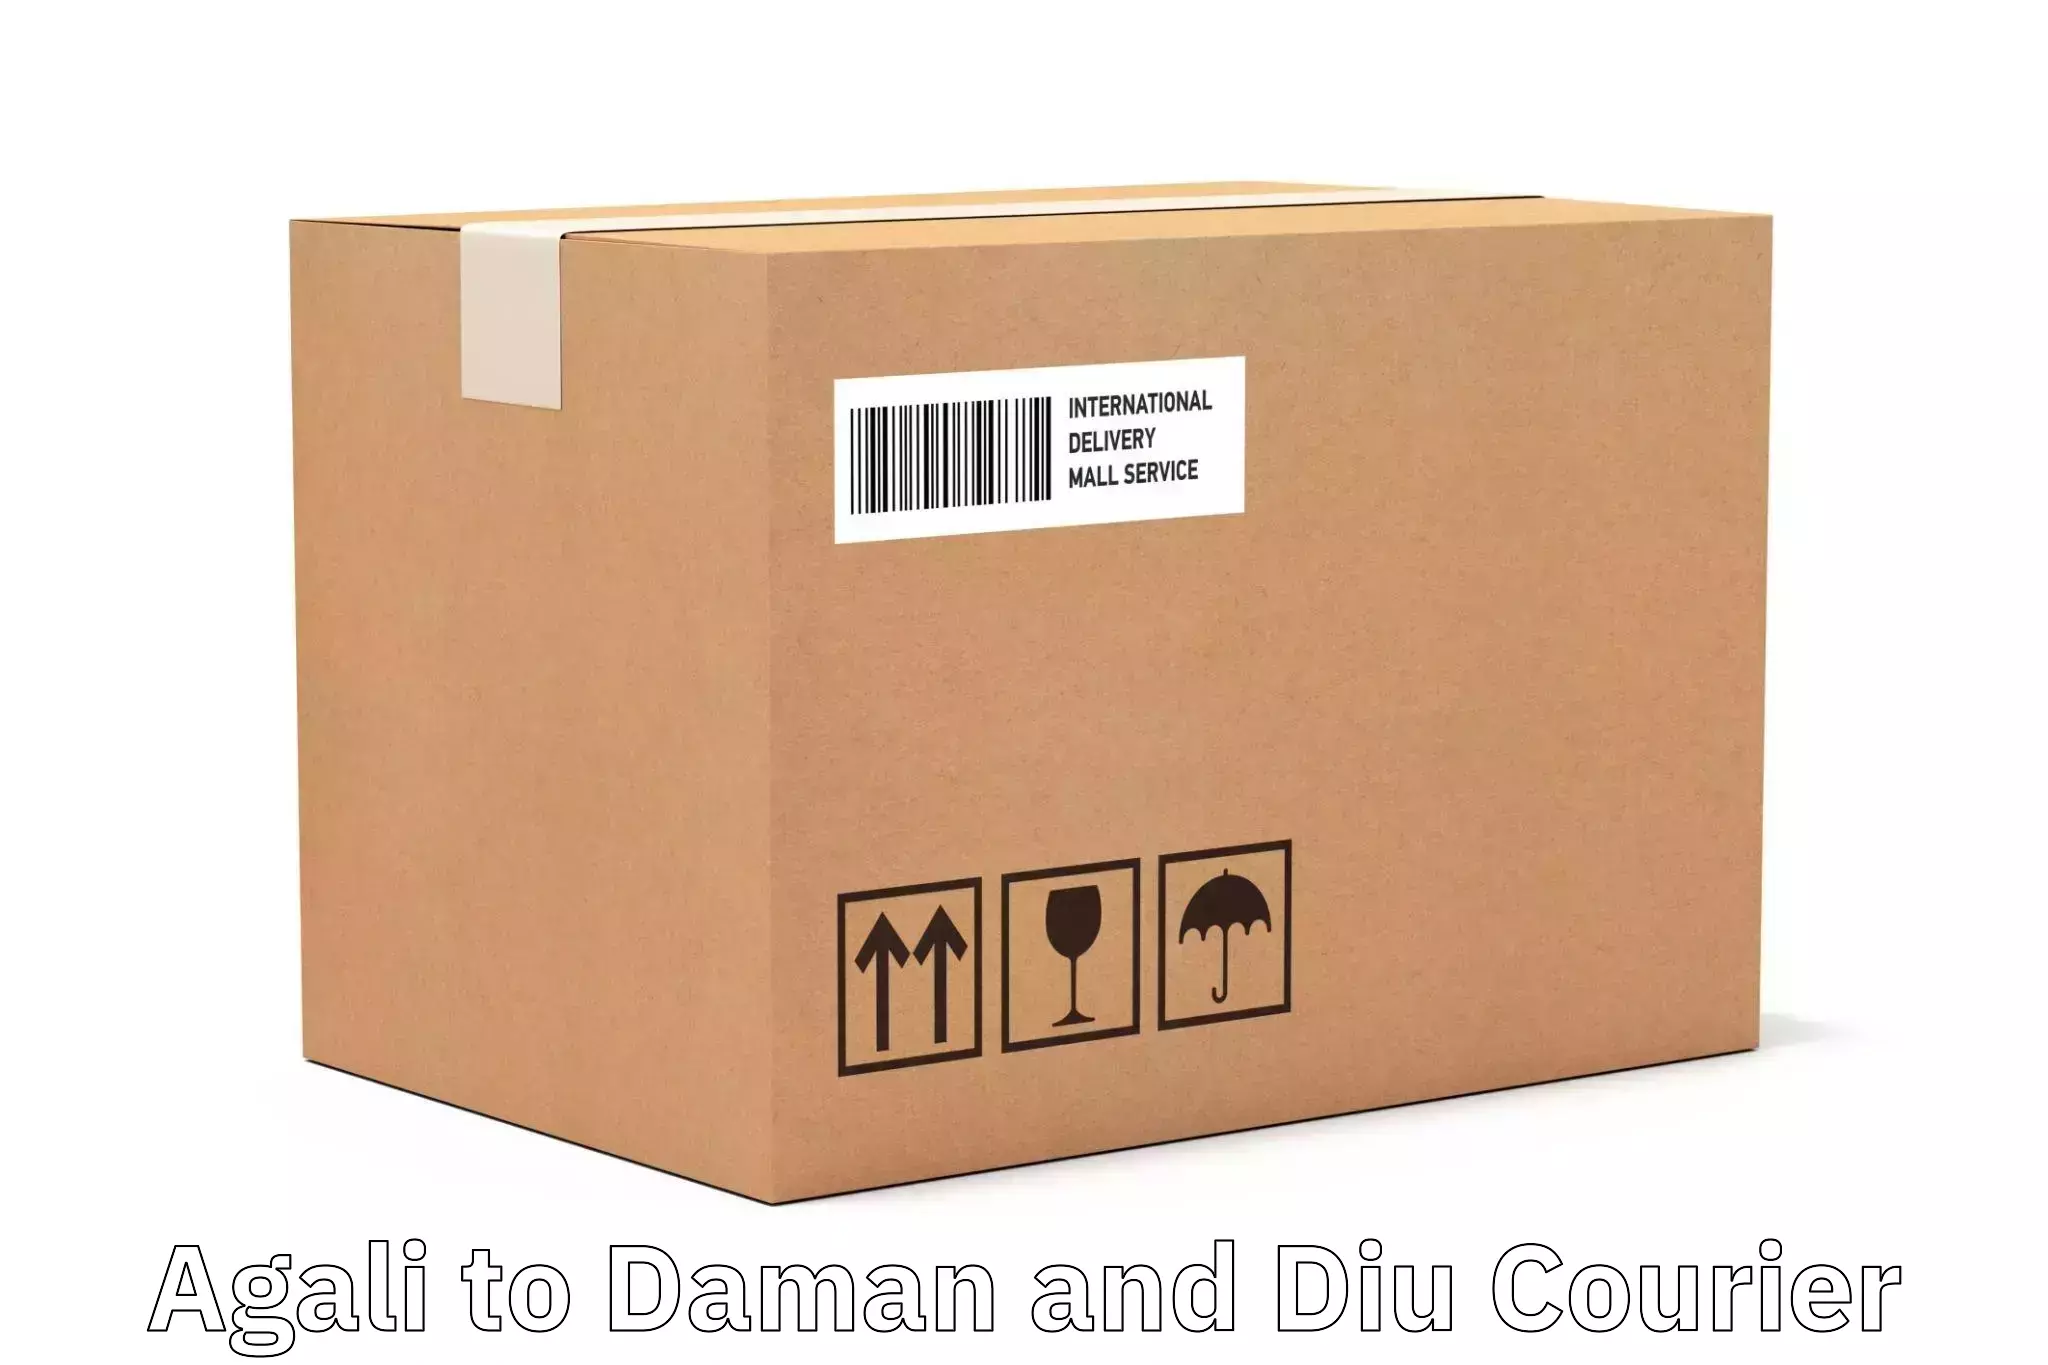 Return courier service in Agali to Daman and Diu